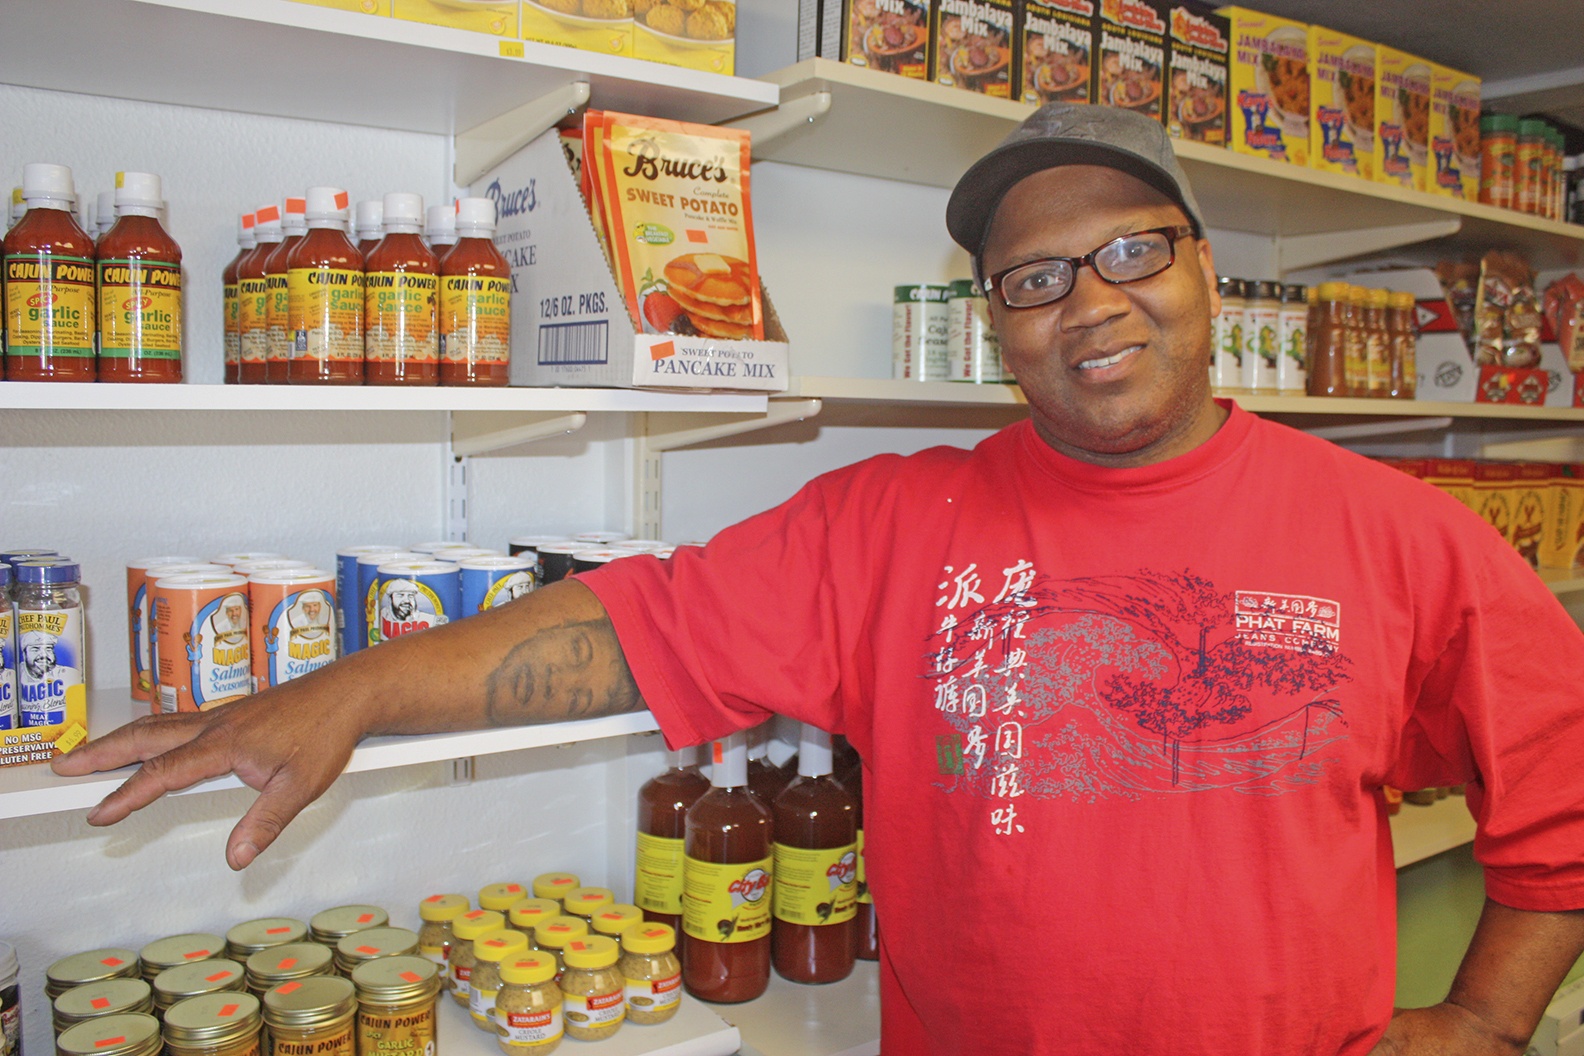 Reginald Robinson is bringing the taste of the South to Kent with Altha’s Louisiana Cajun Seasoning & Spices